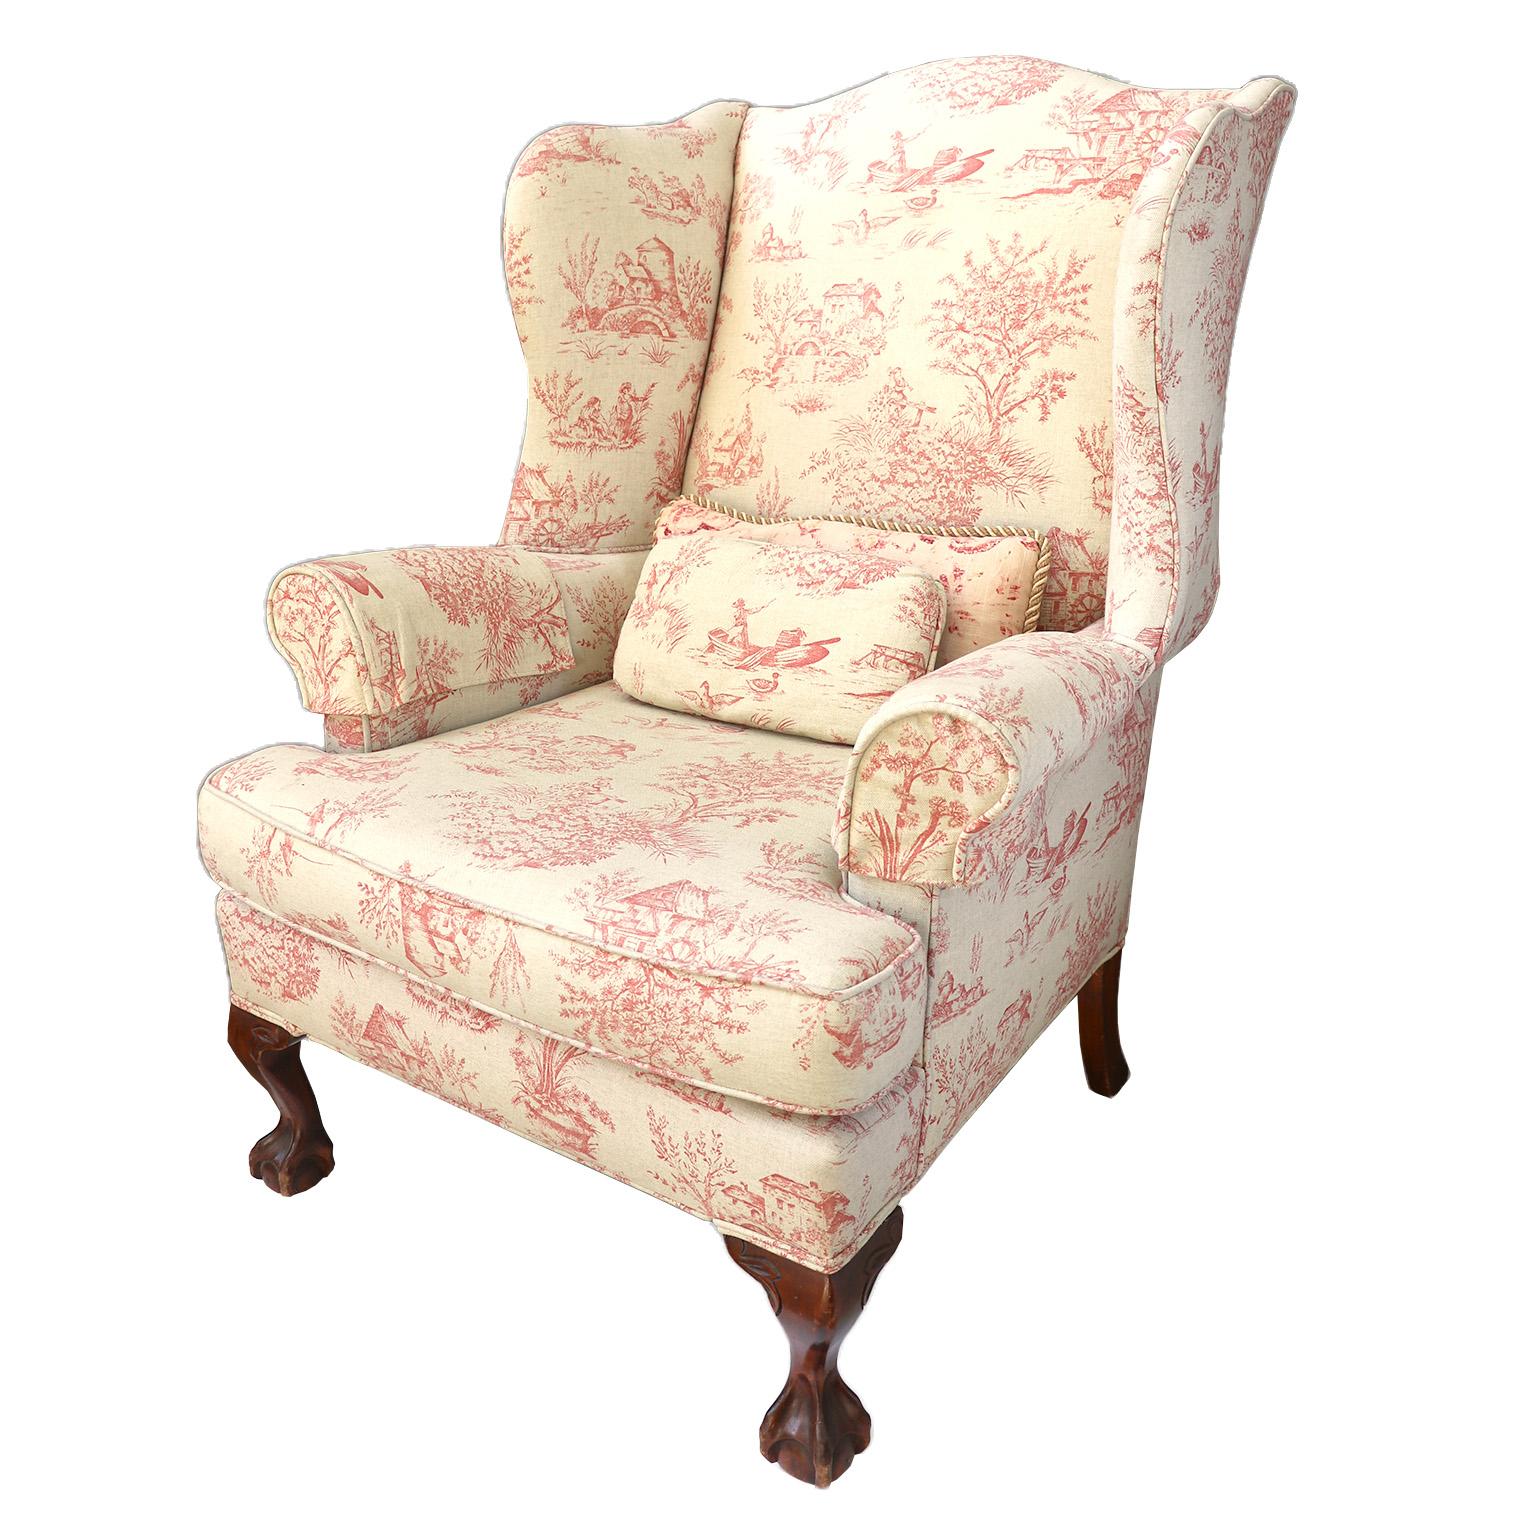 Vintage Decorative Fabric Chair In Good Condition For Sale In San Francisco, CA